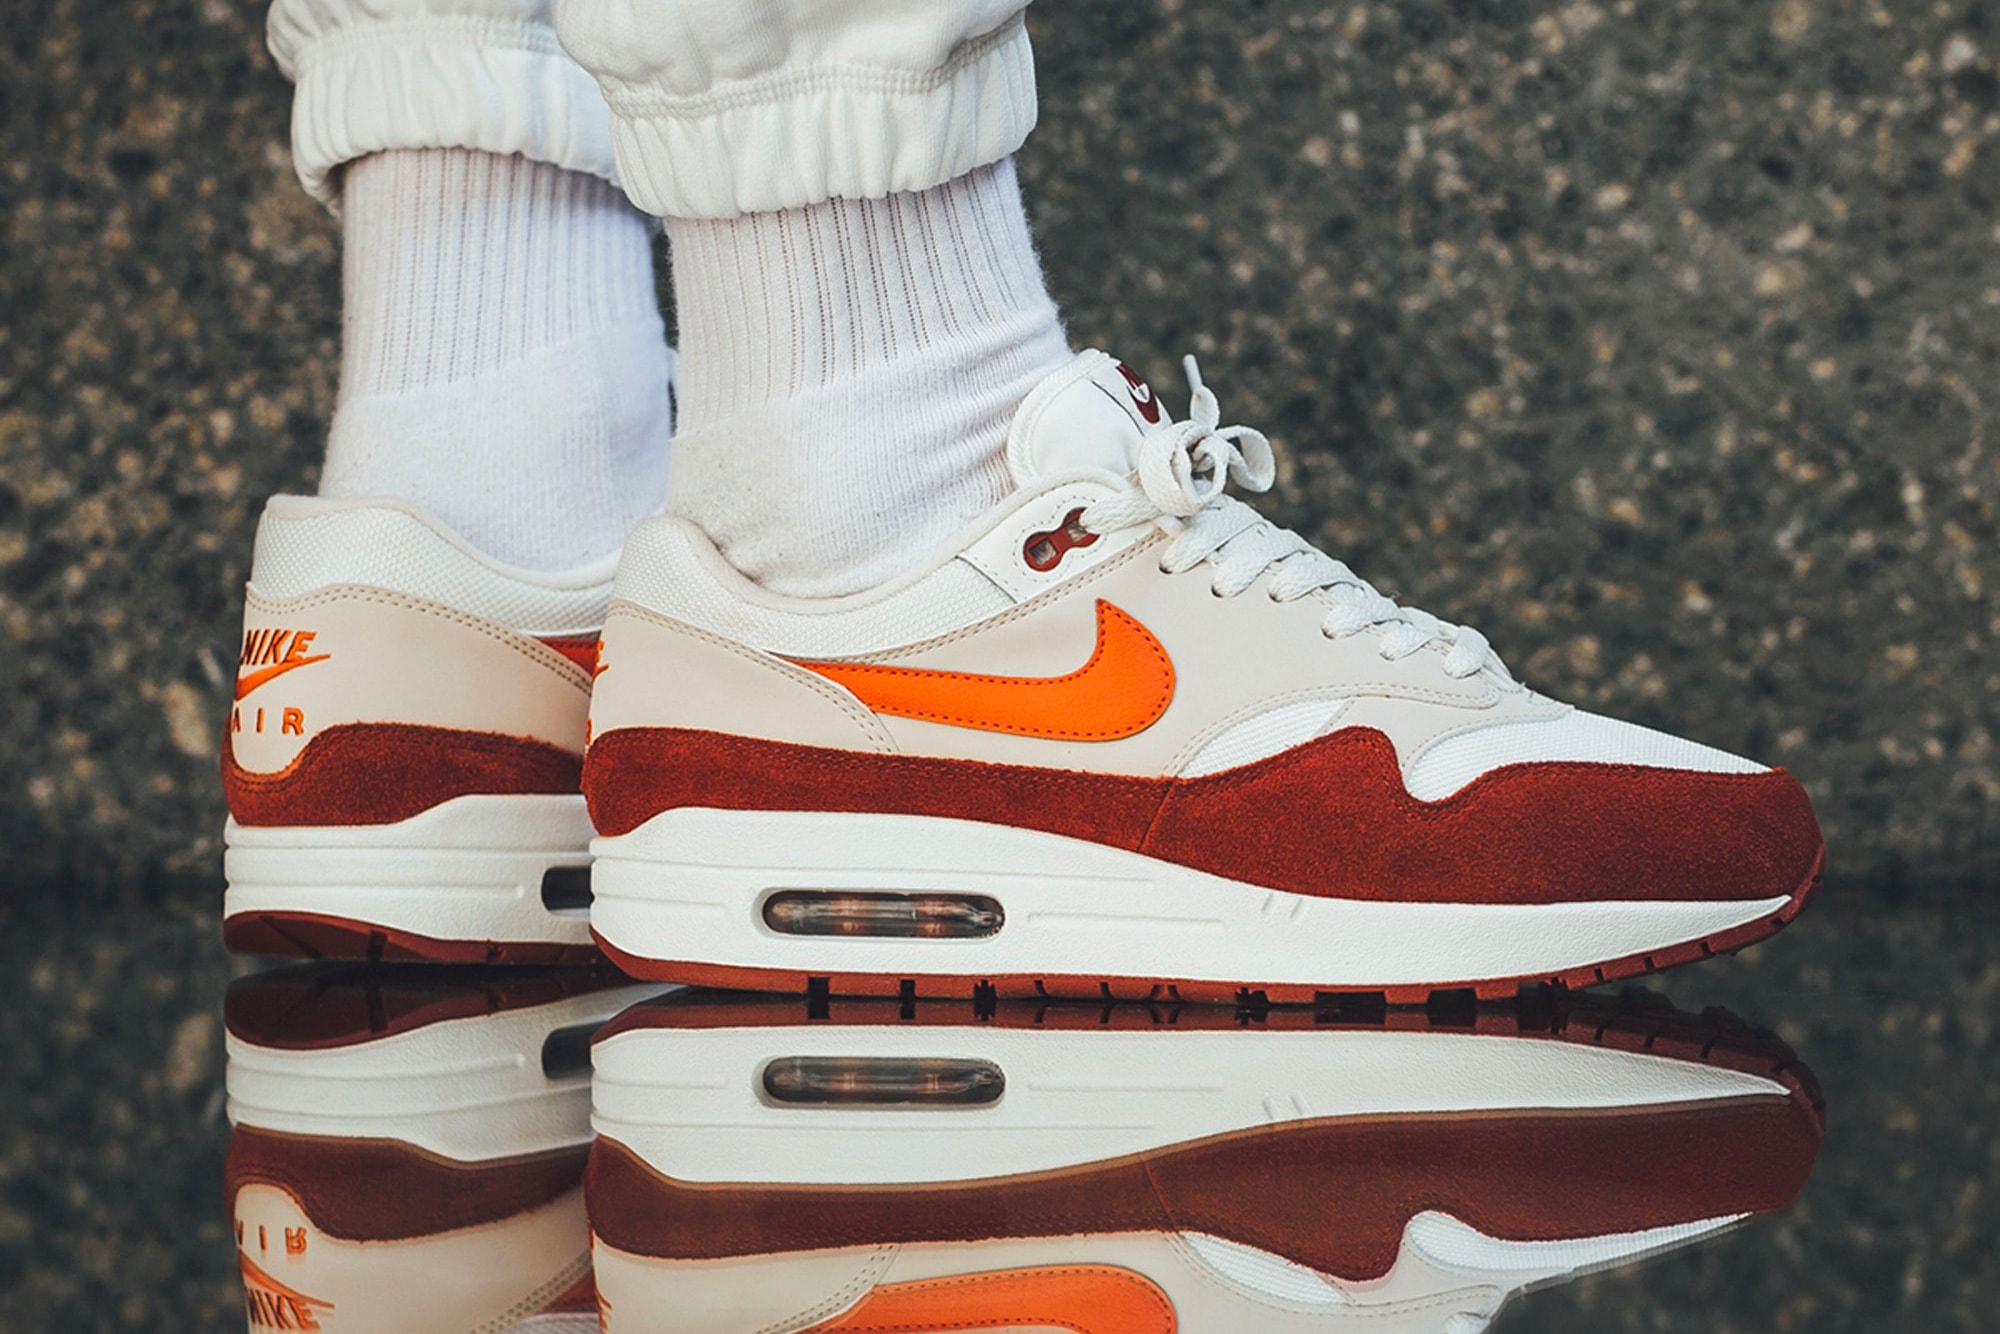 Nike Air Max 1 Curry On-Feet Vintage Coral Mars Stone release date drop info purchase price footwear sneaker summer 2018